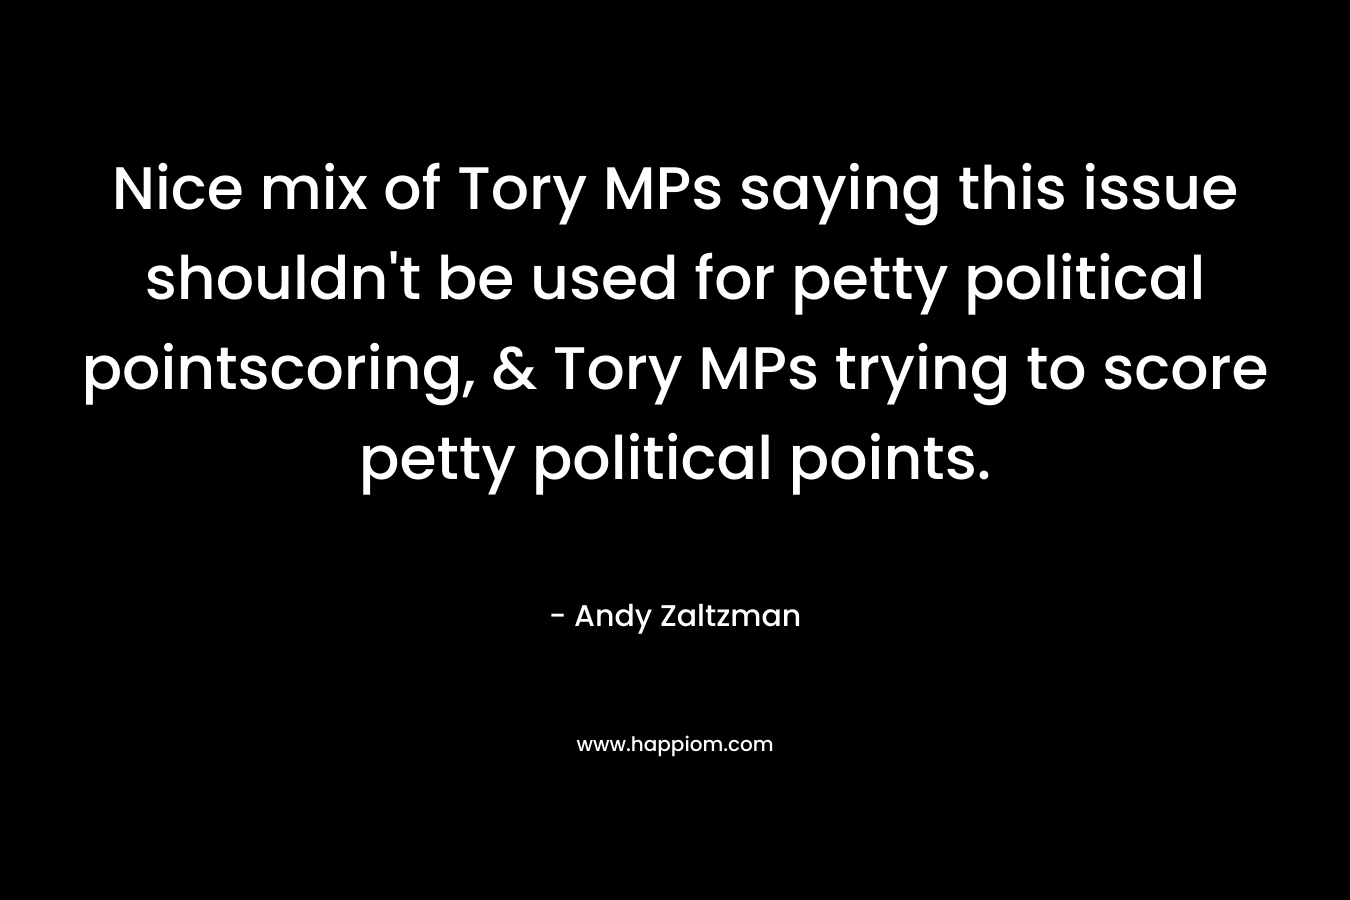 Nice mix of Tory MPs saying this issue shouldn’t be used for petty political pointscoring, & Tory MPs trying to score petty political points. – Andy Zaltzman